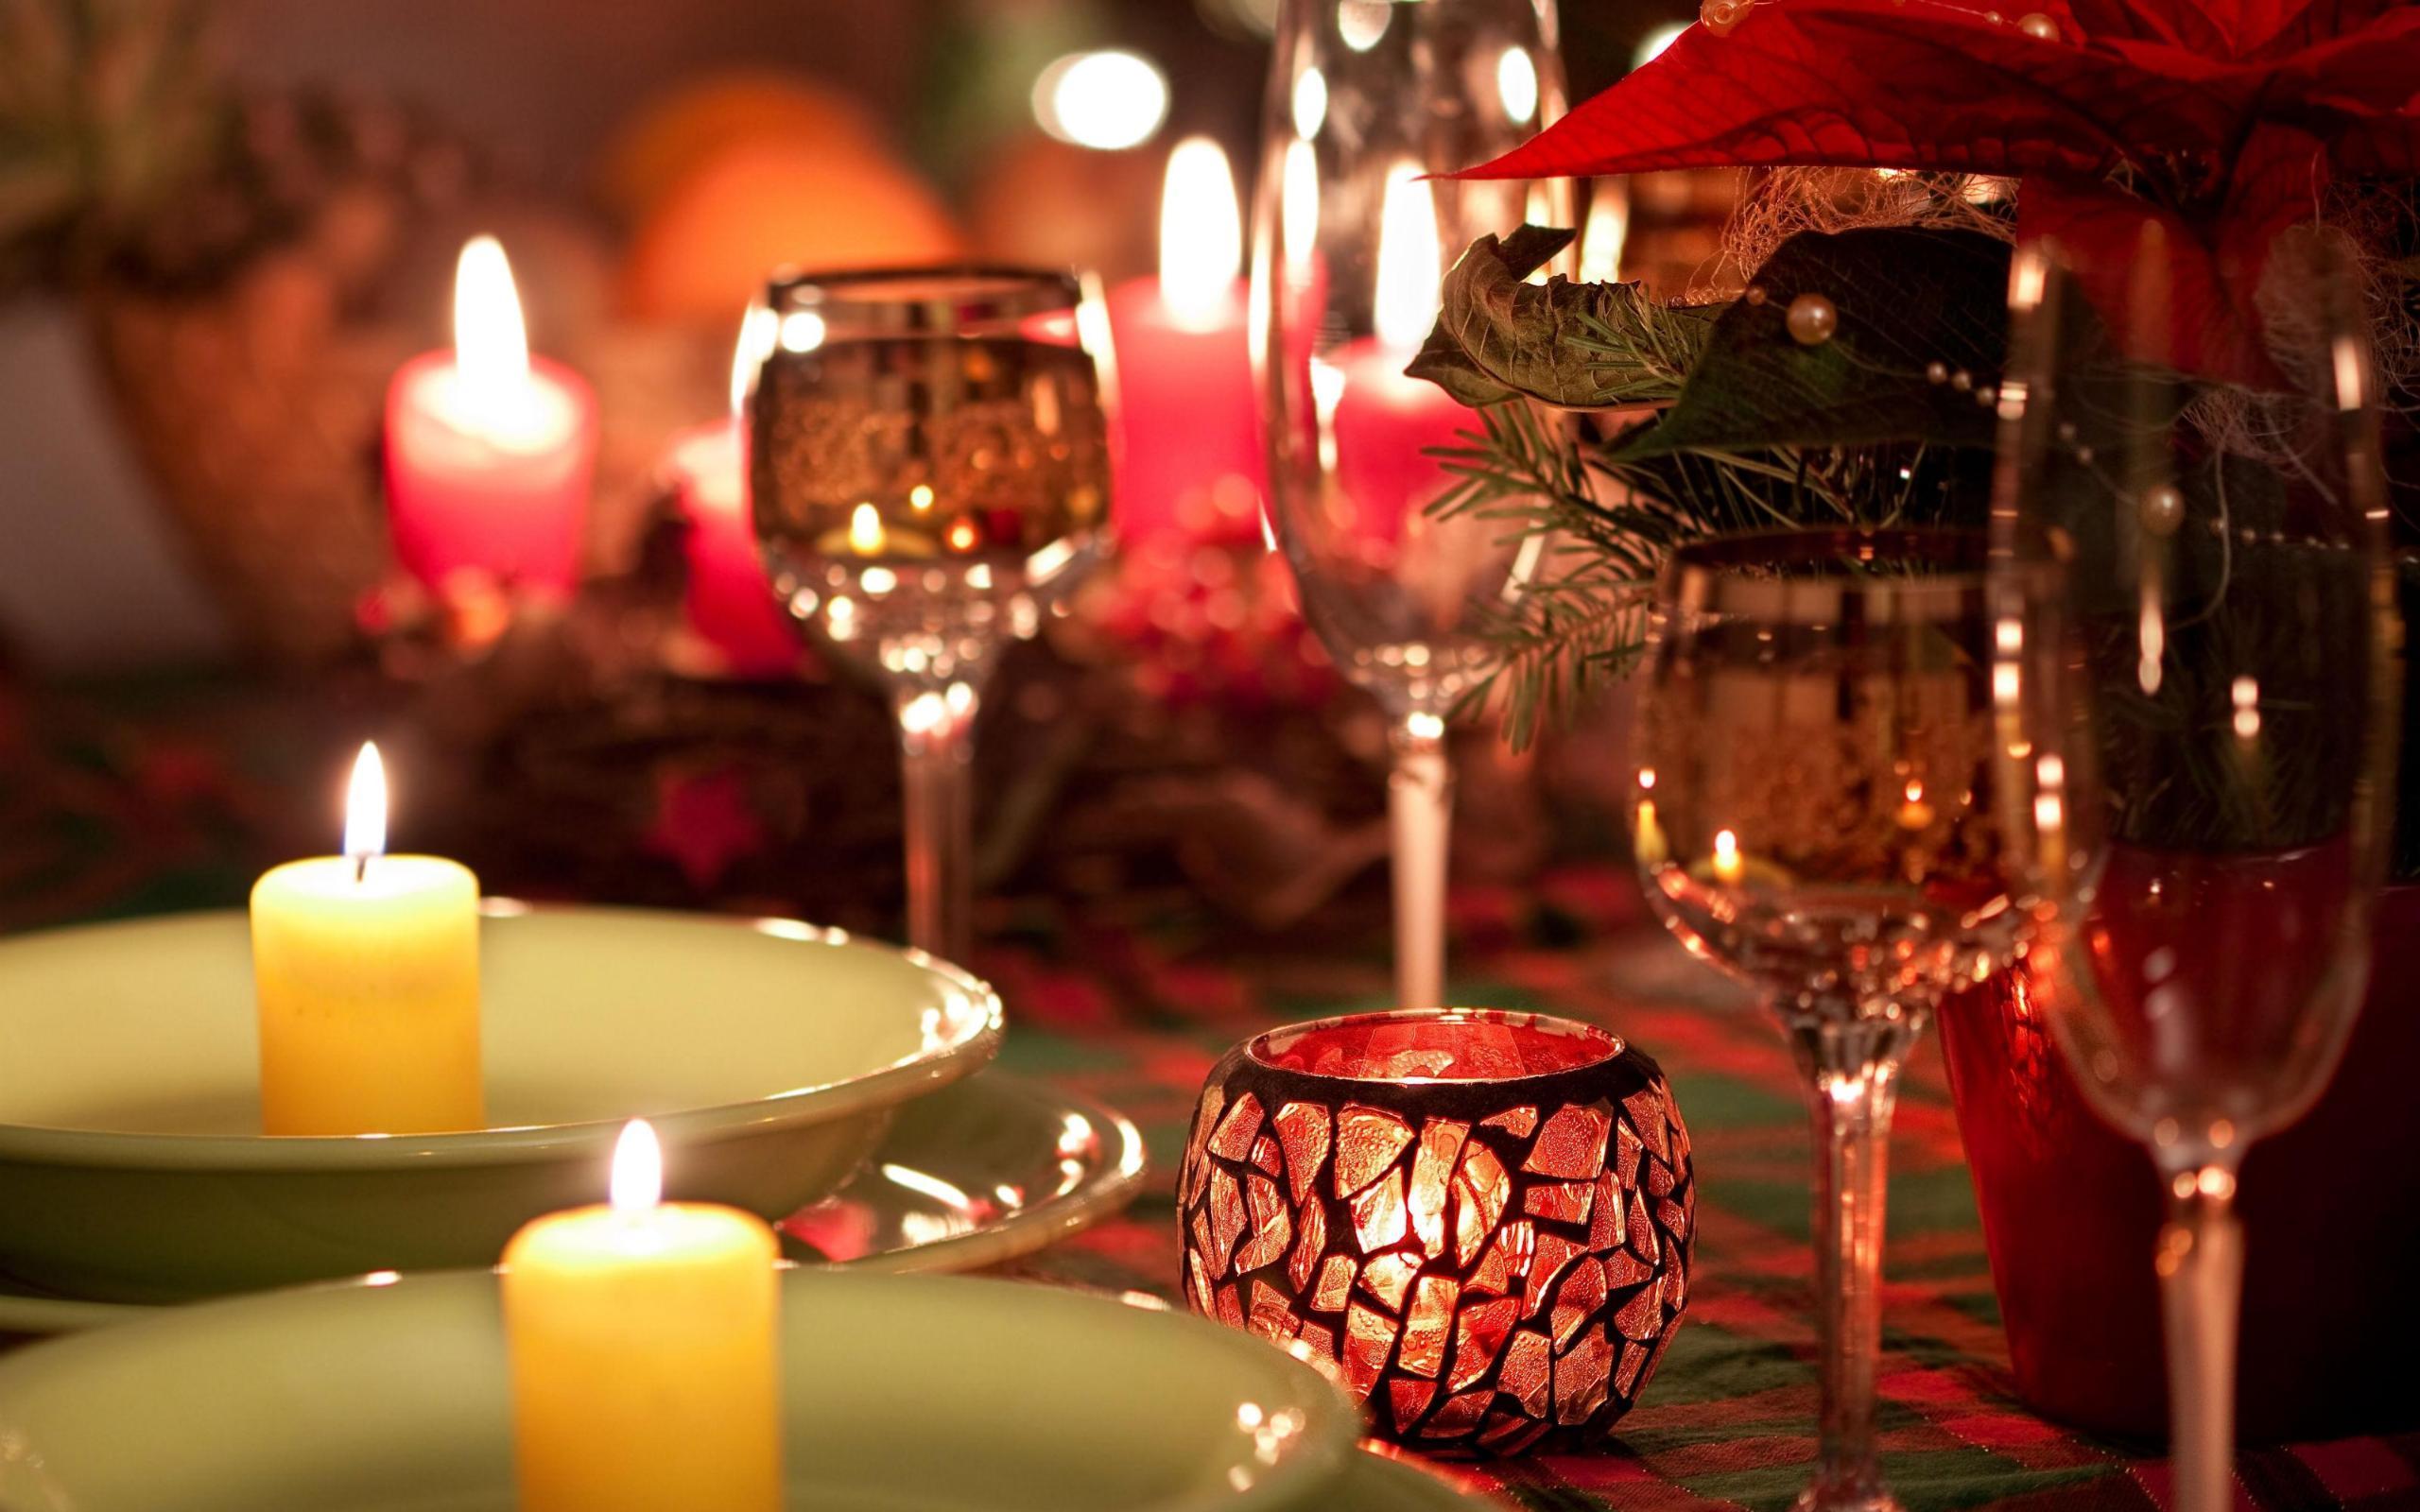 Table, Plates, Candles, Glasses, Fire, Romance